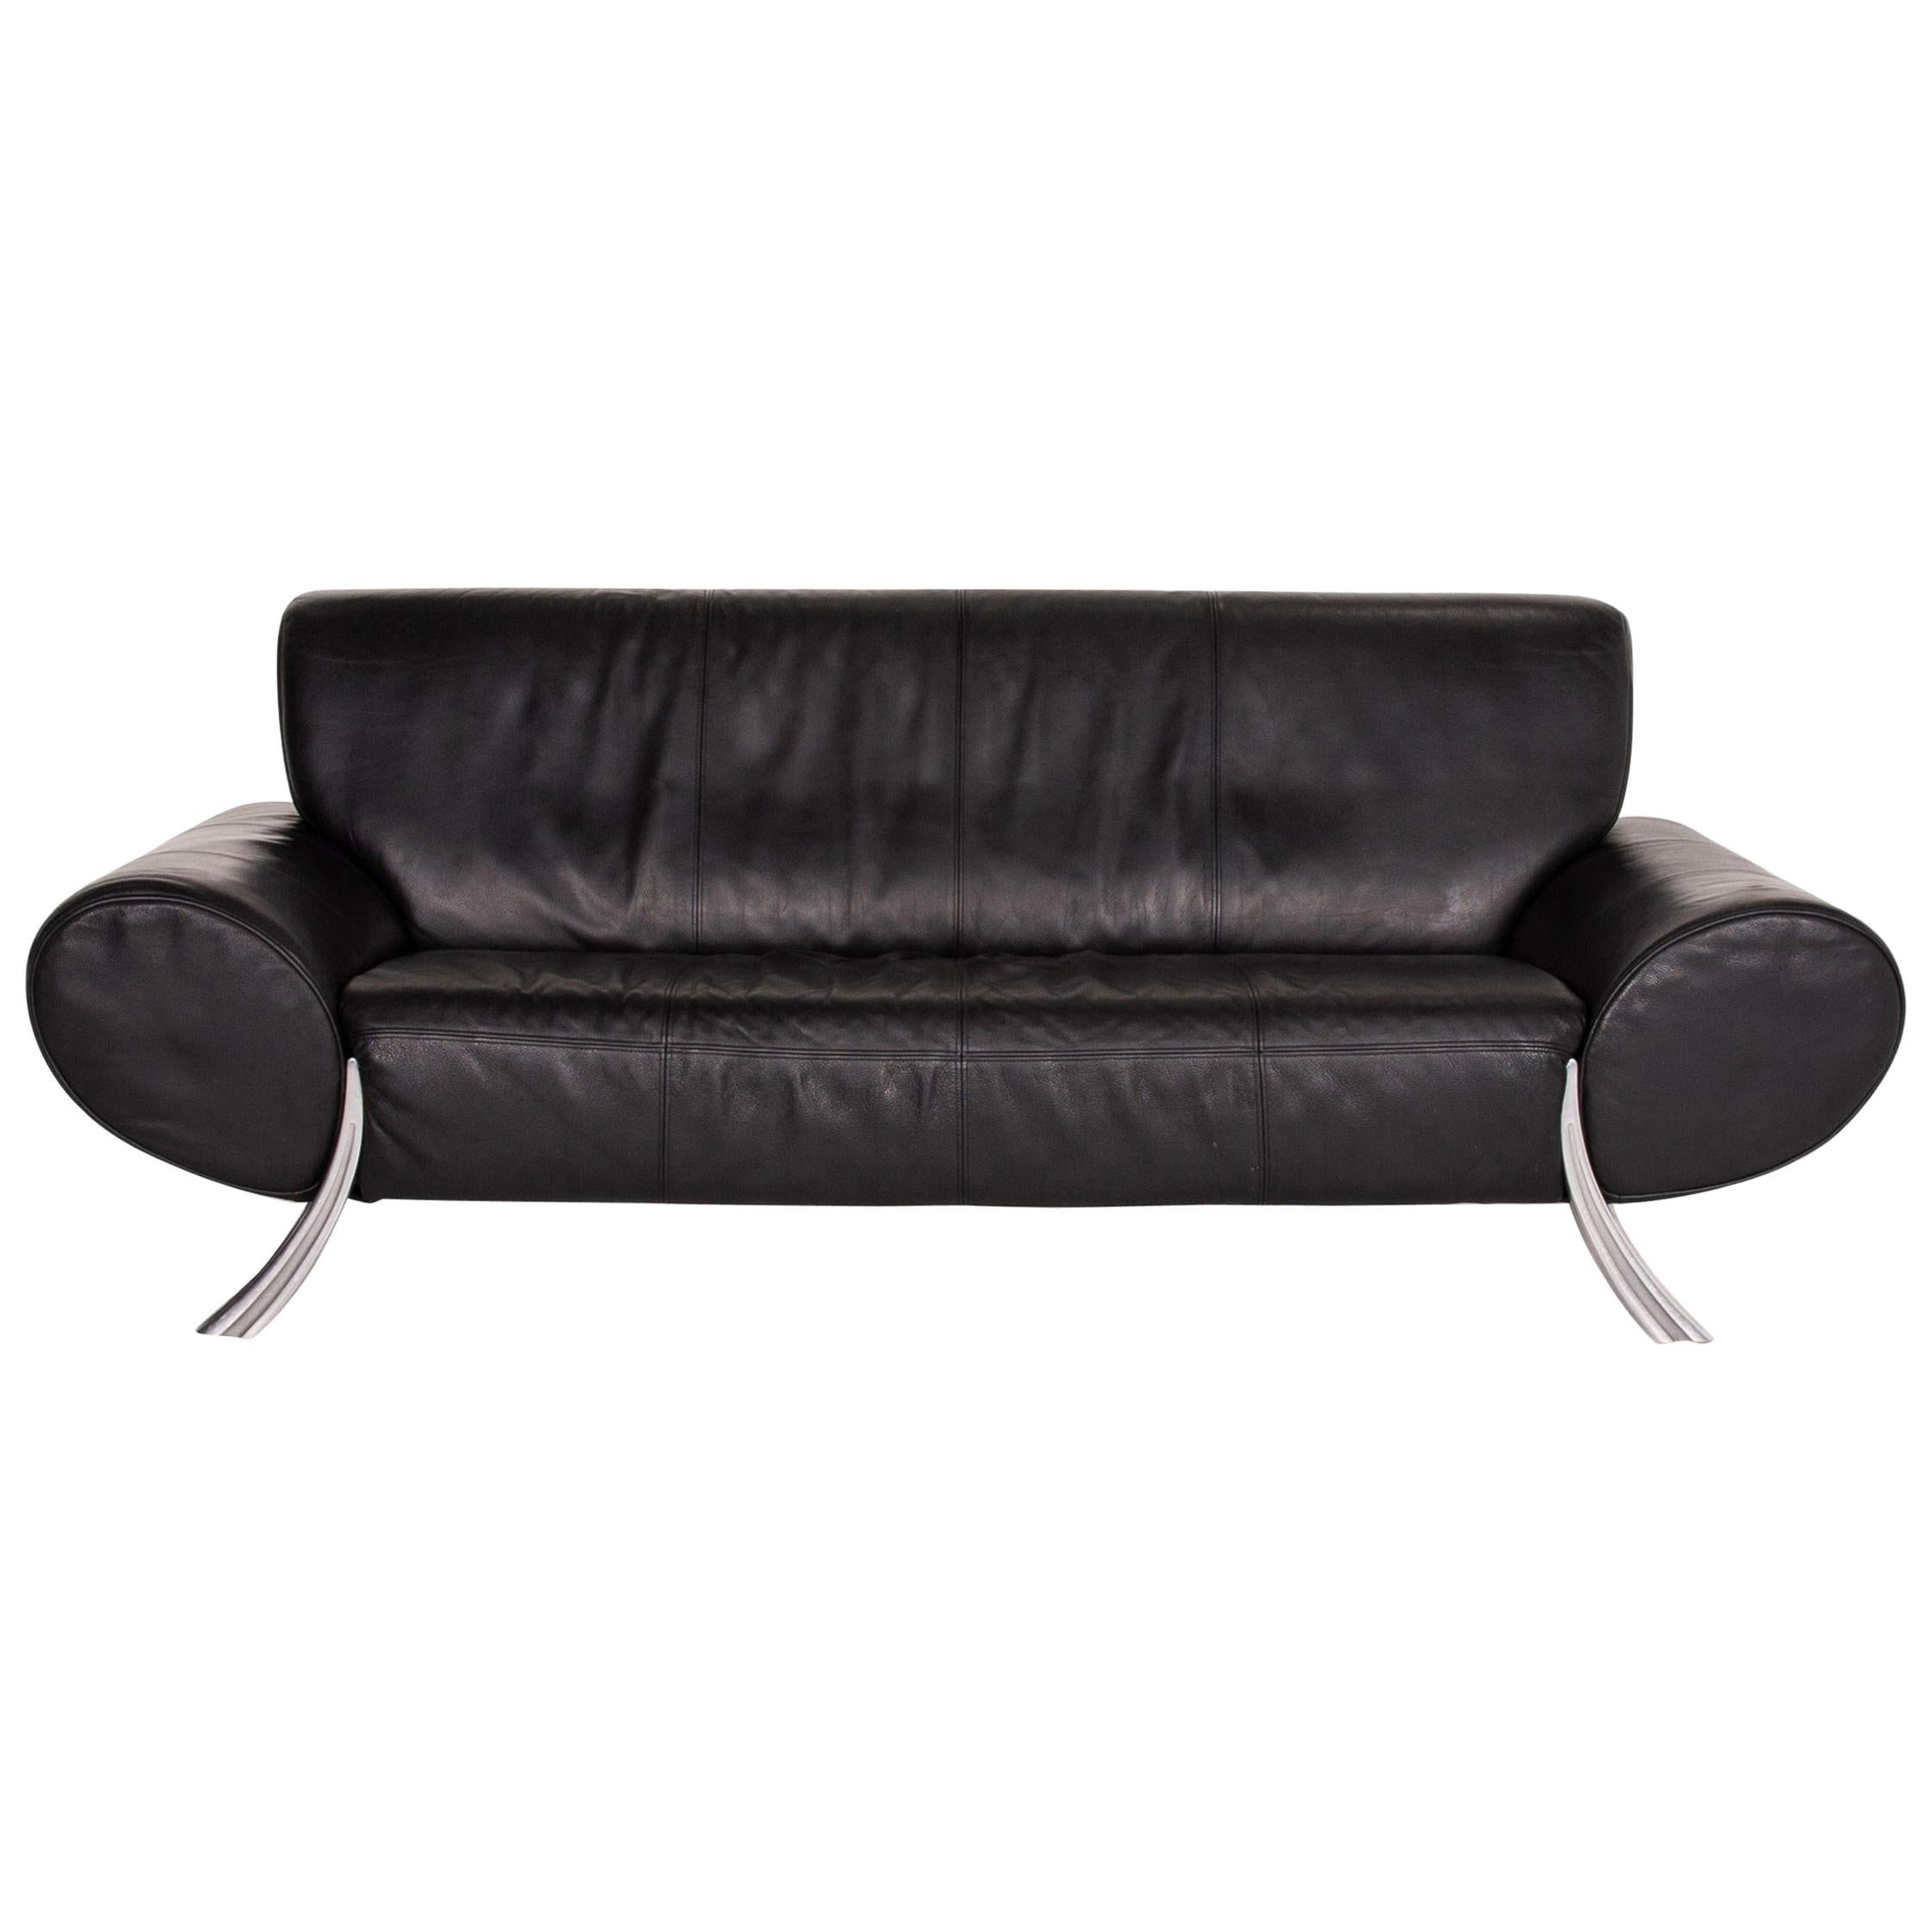 Rolf Benz Leather Sofa Black Three-Seat Couch For Sale